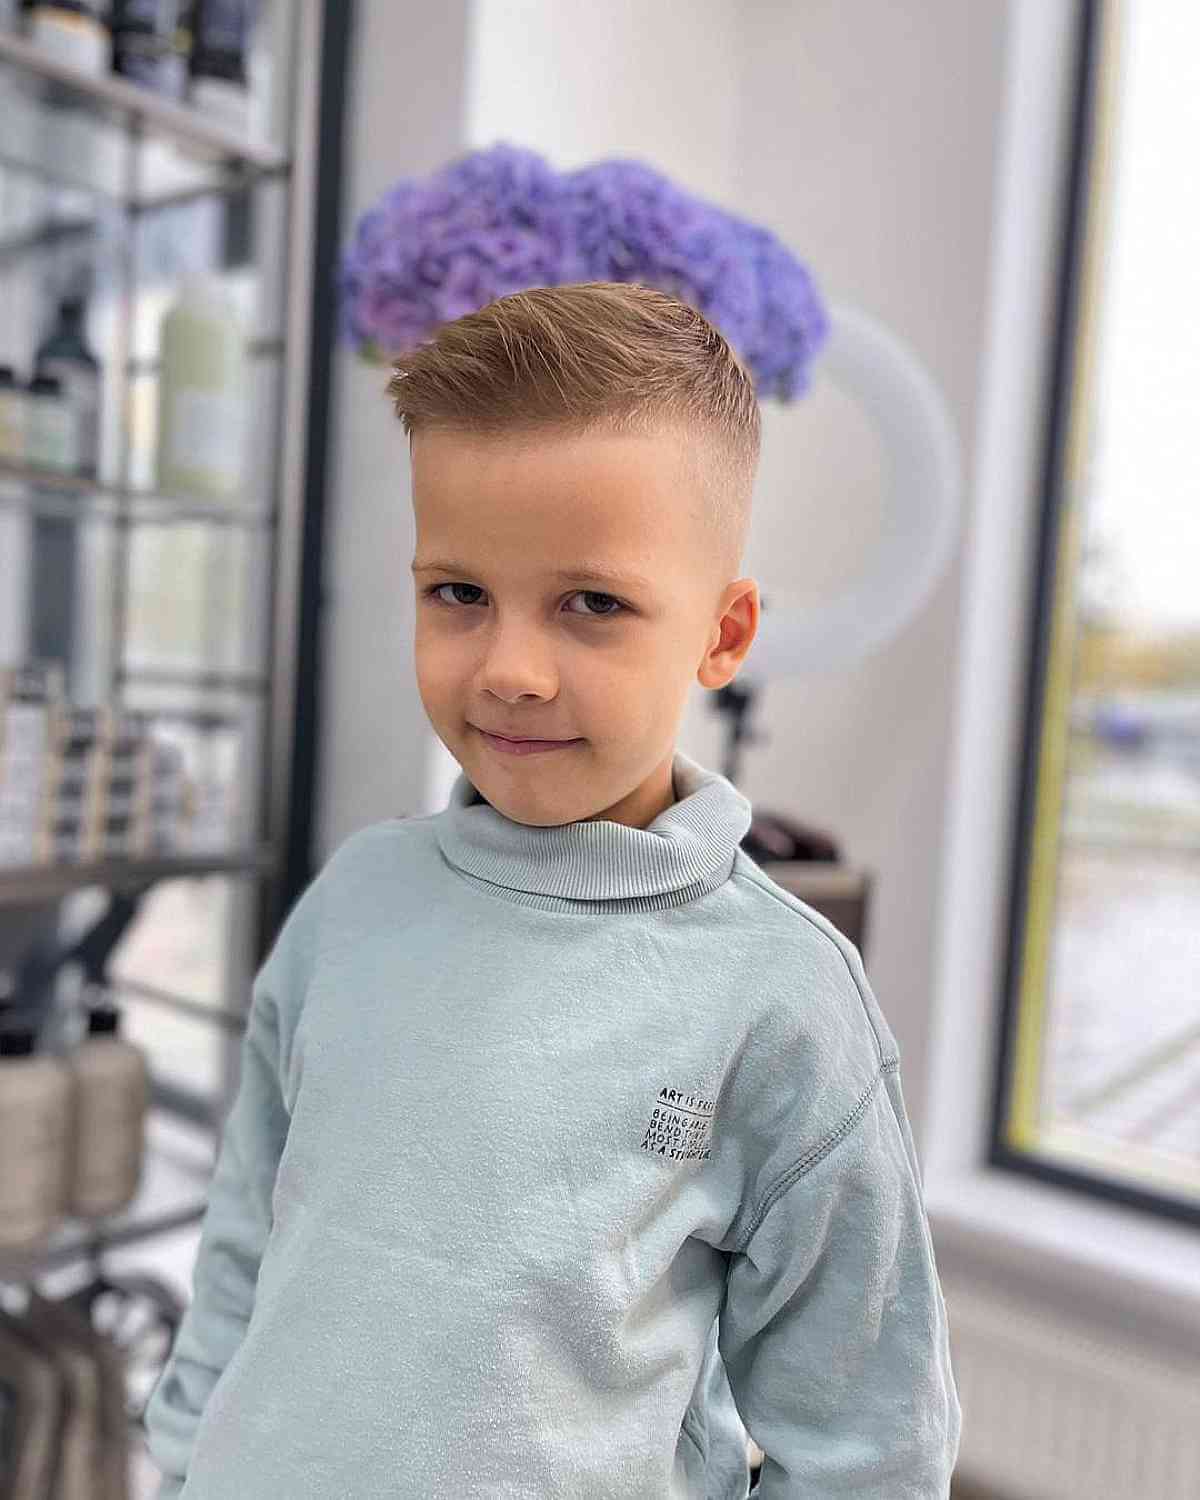 Bald Fade with a Textured Top for Kids